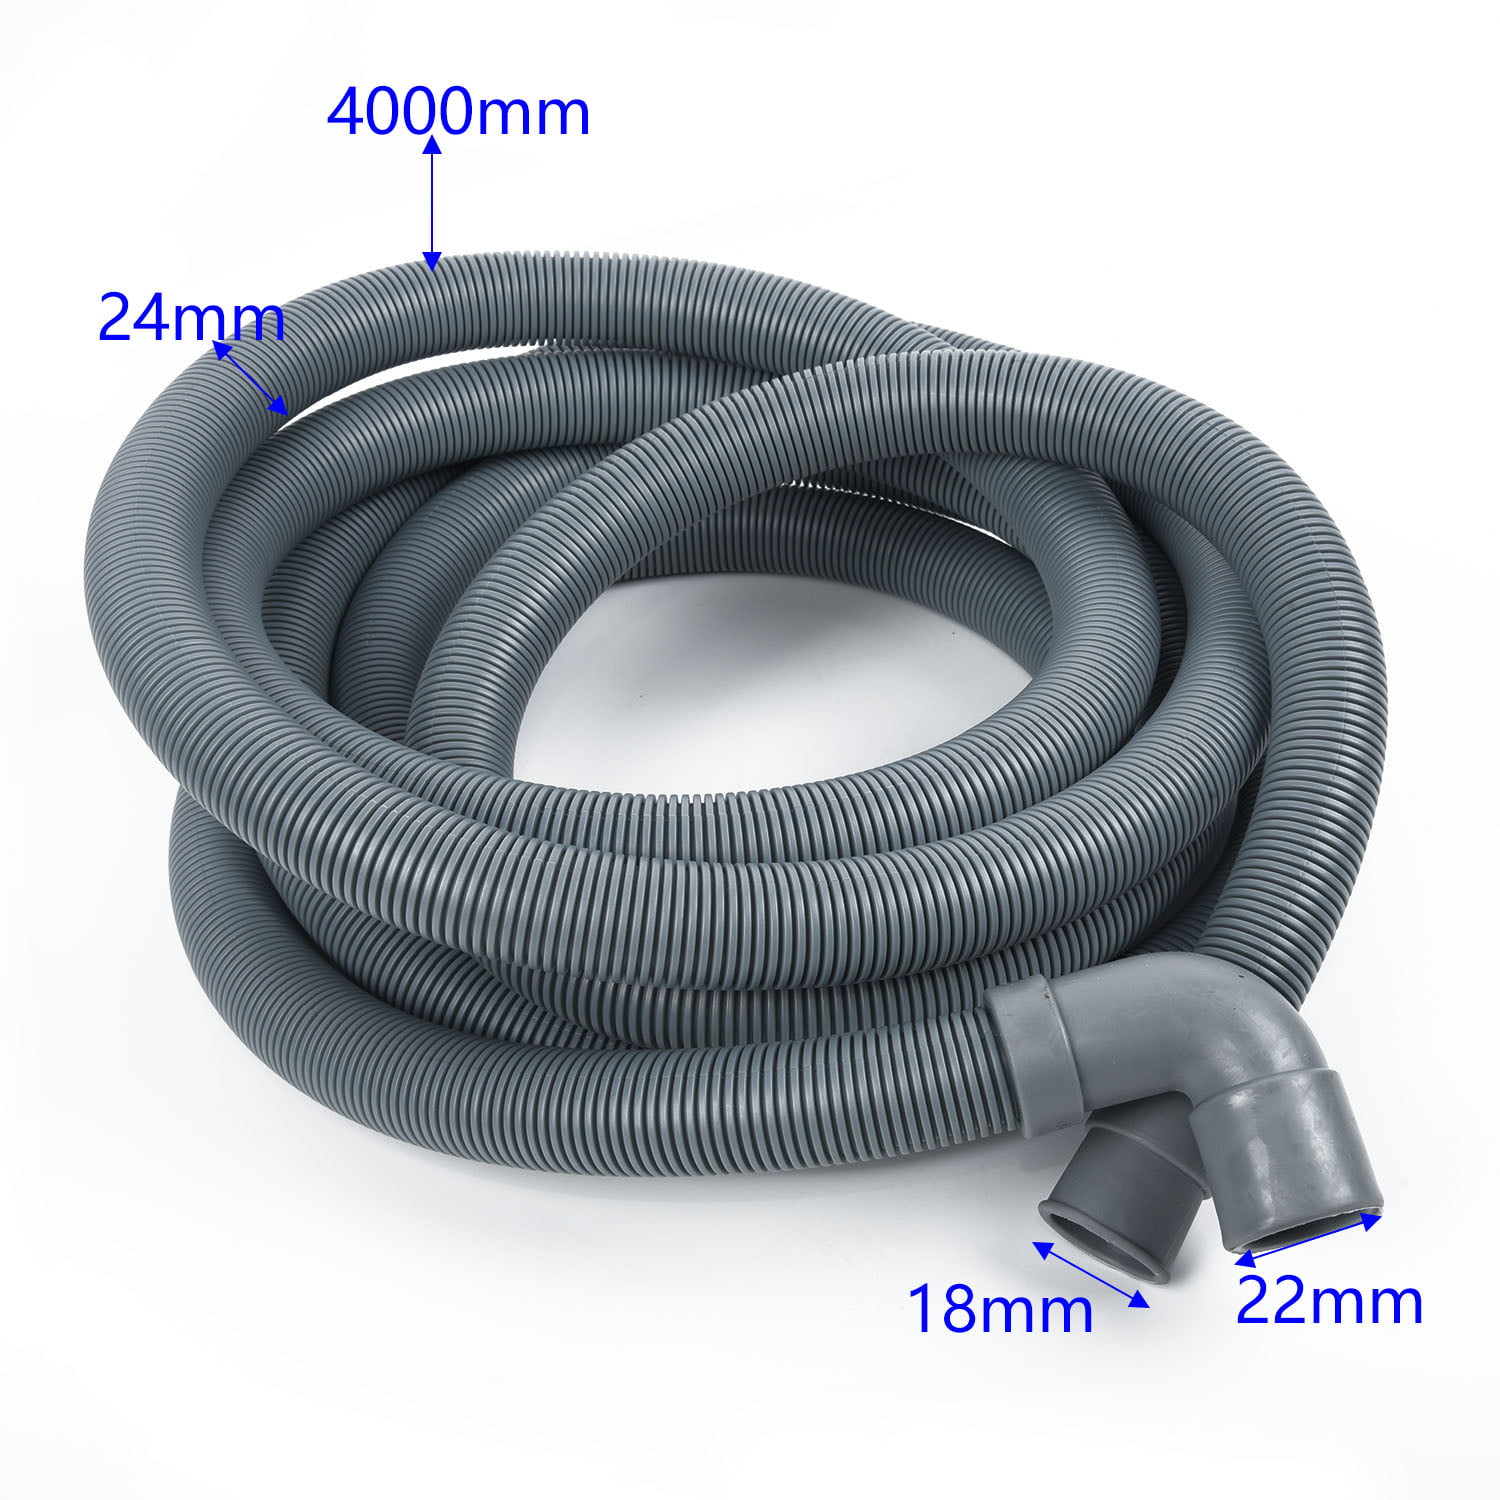 Washing Machine Dishwasher Outlet Connector Drain Hose Joiner 21mm x 21mm